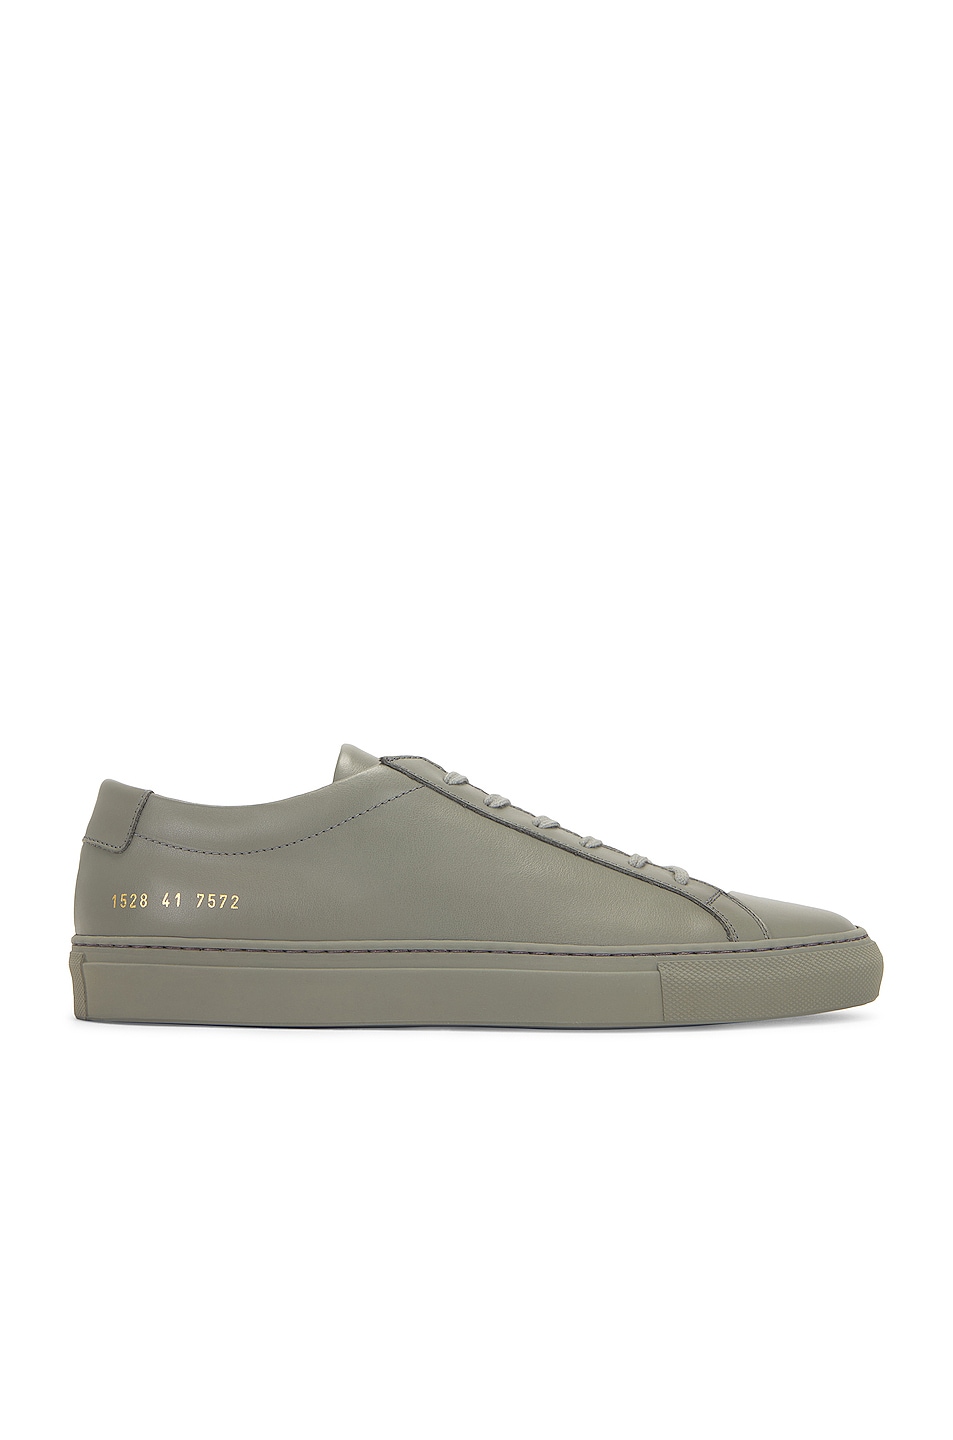 Image 1 of Common Projects Original Achilles Low Article 1528 in Cobalt Grey